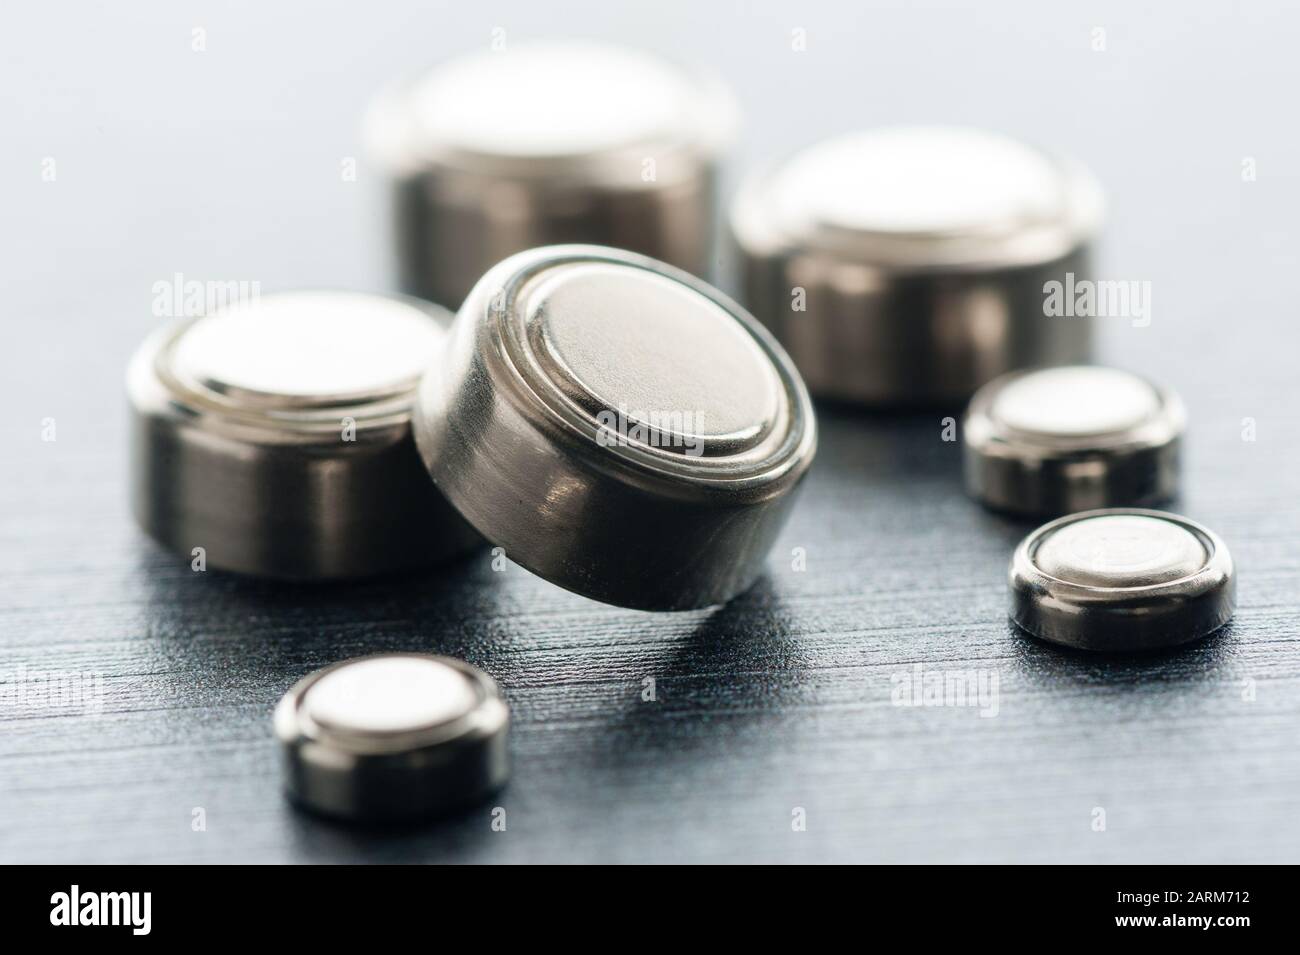 closeup button cell battery or watch battery or coin cell, used to power small electronics devices such as wrist watches or computer motherboard. Stock Photo